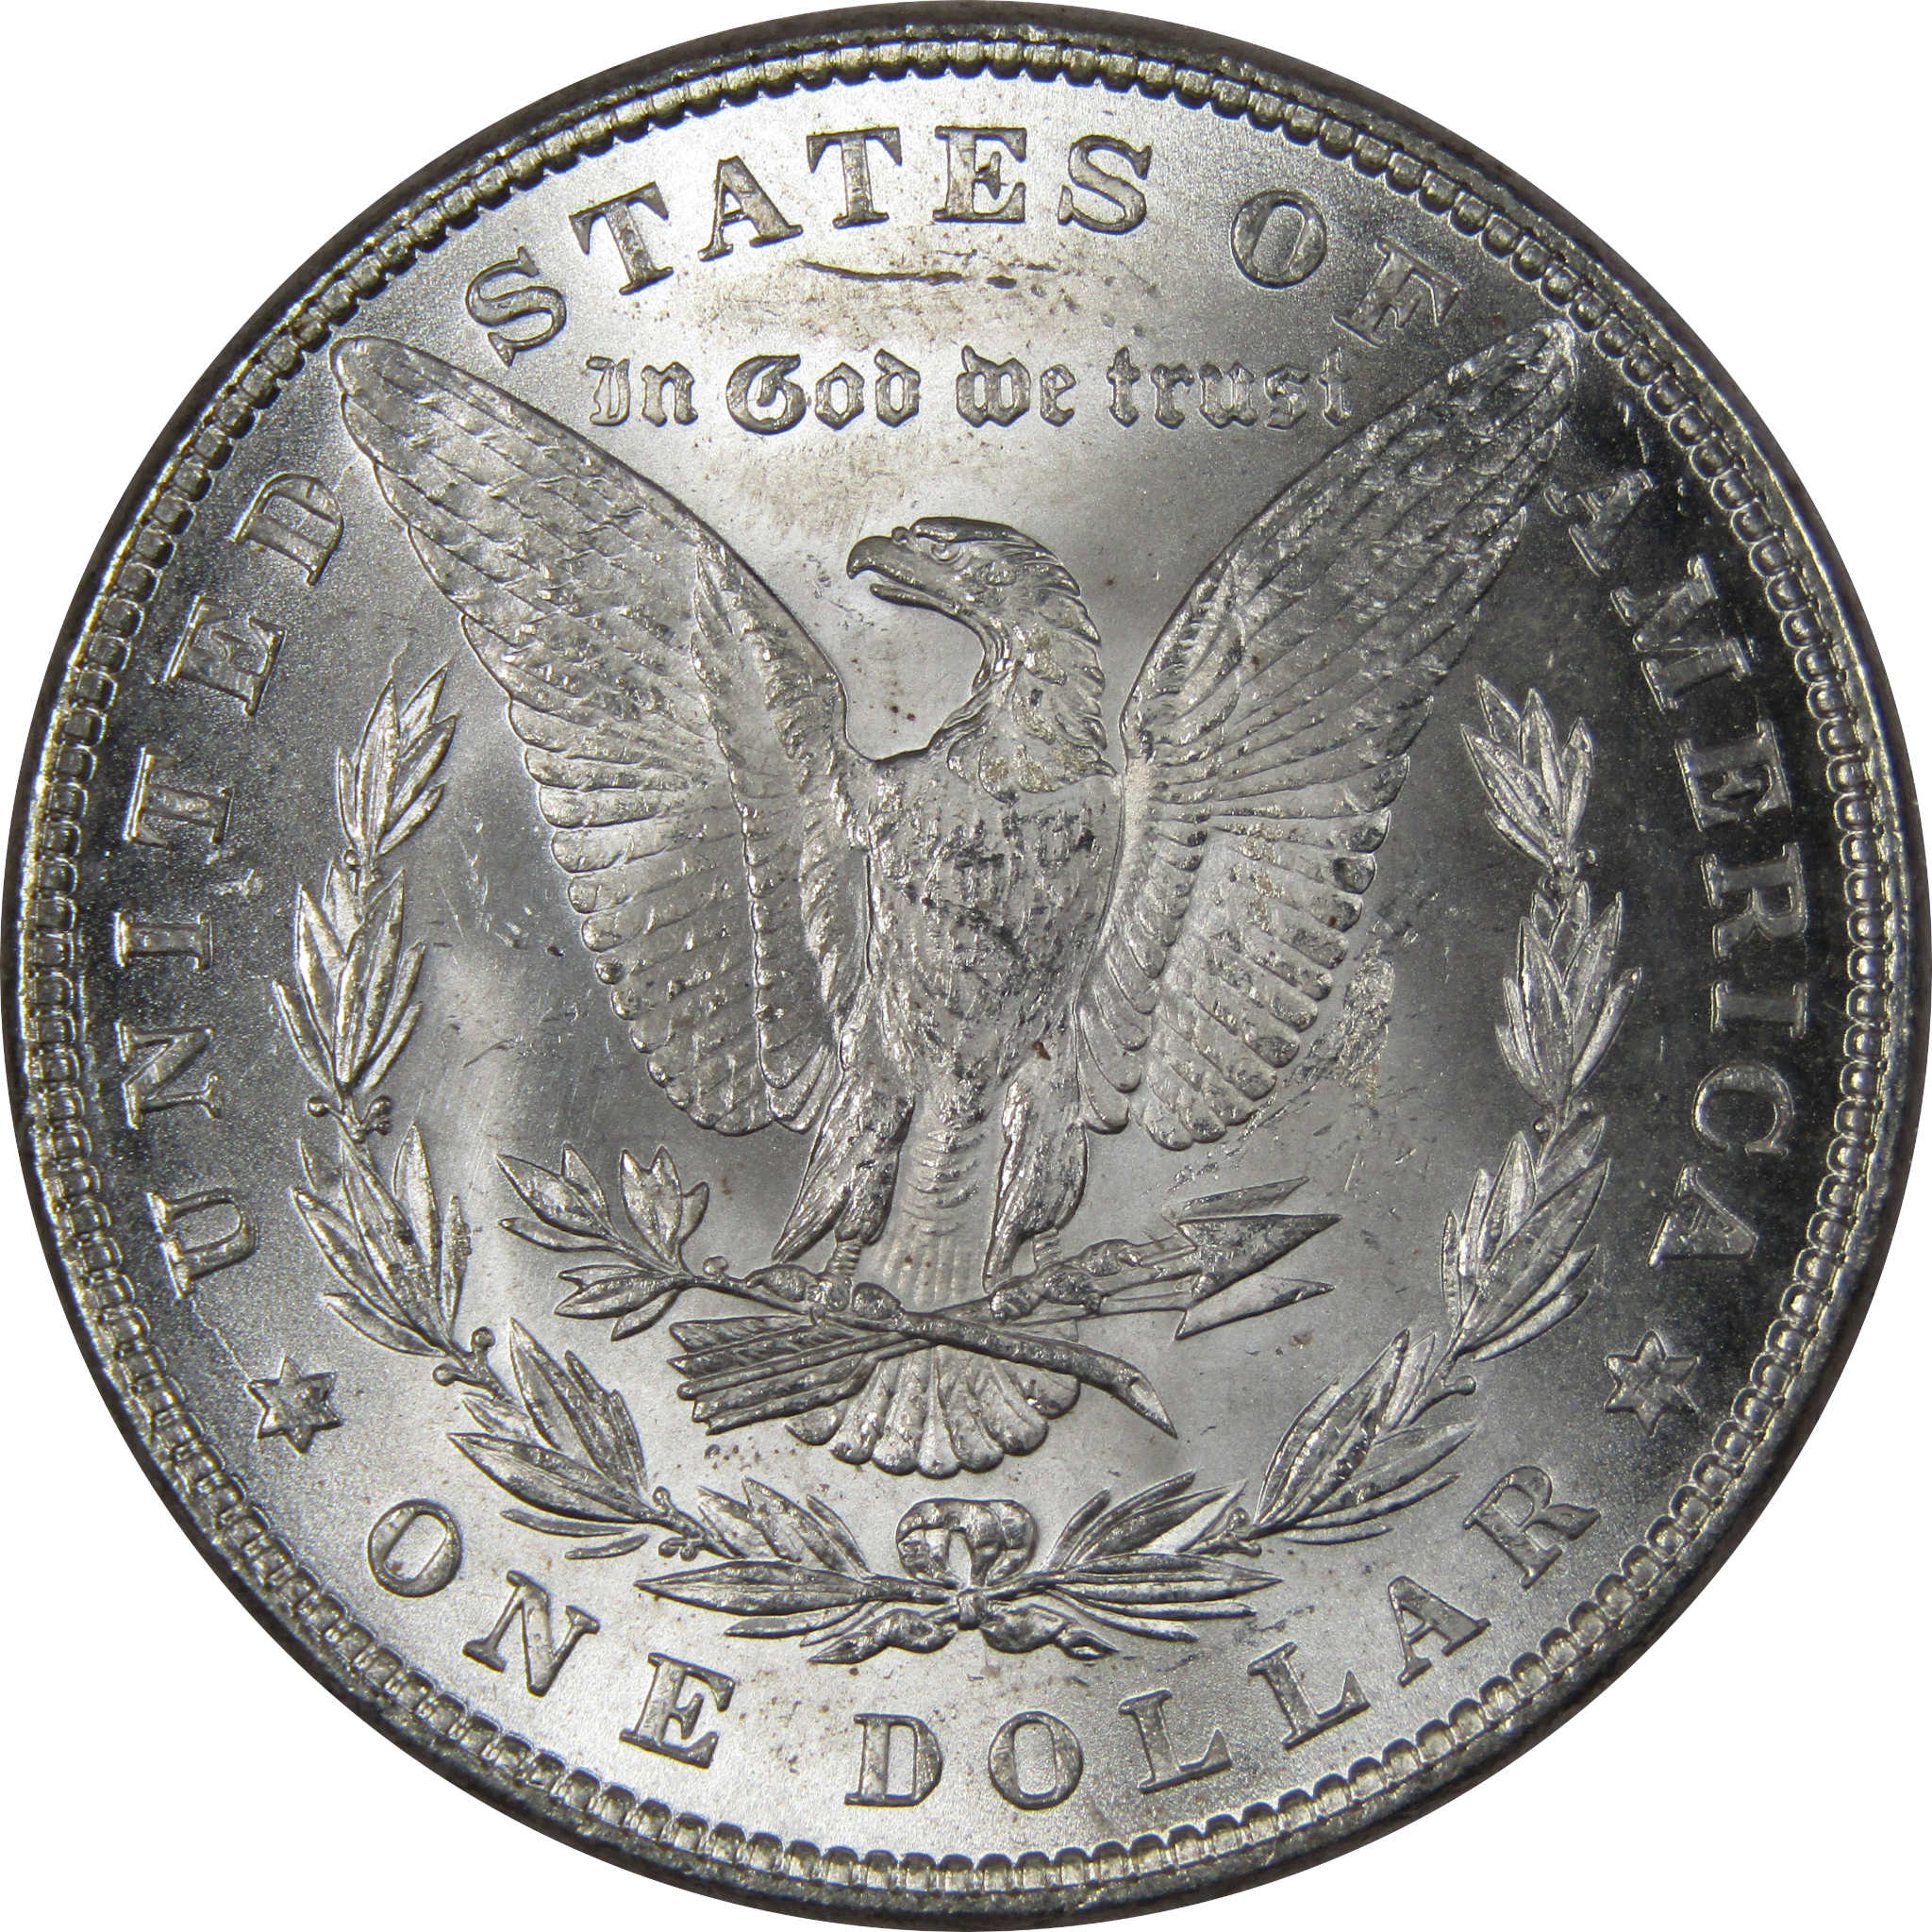 1882 Morgan Dollar BU Uncirculated Mint State 90% Silver SKU:IPC9682 - Morgan coin - Morgan silver dollar - Morgan silver dollar for sale - Profile Coins &amp; Collectibles